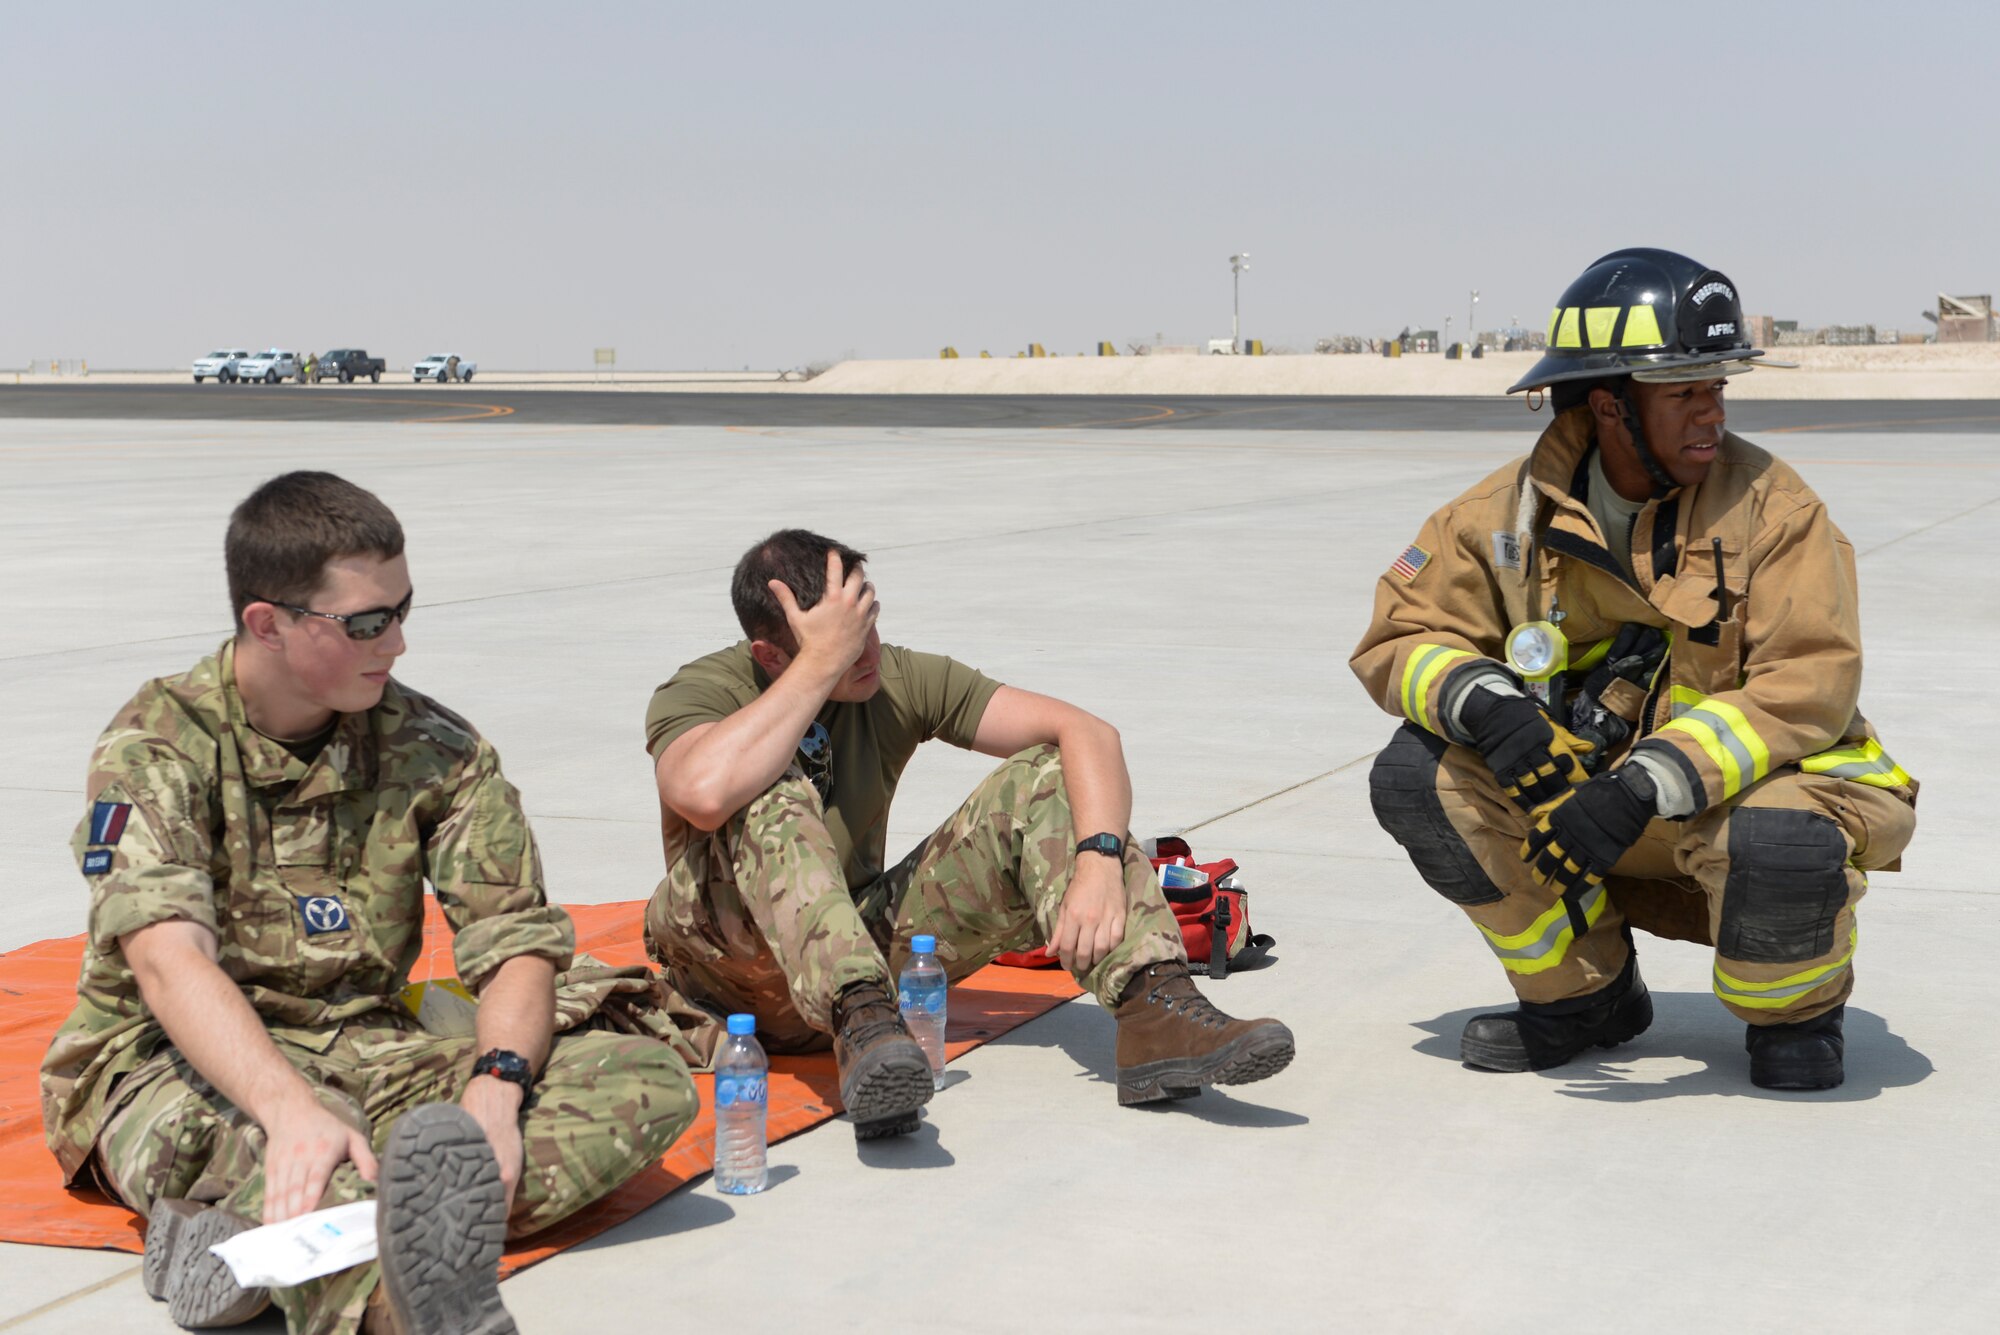 U.S. Air Force Senior Airman William Elliott, firefighter assigned to the 379th Expeditionary Civil Engineering Squadron, right, attends to two simulated casualties played by Royal Air Force airmen, on the runway at Al Udeid Air Base, Qatar, Oct. 3, 2017.